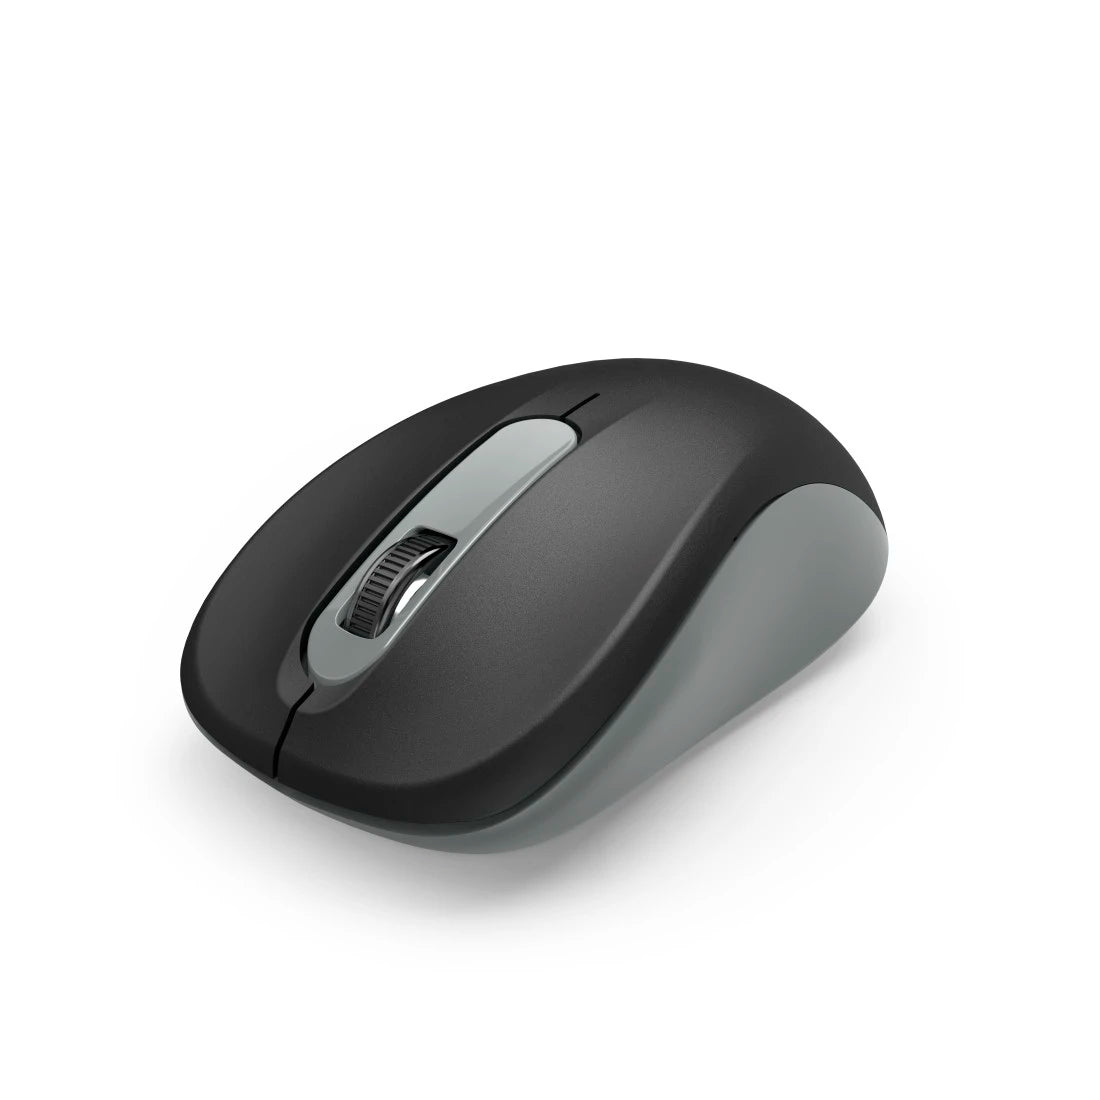 Hama AMW-200 Optical Wireless Mouse - Black &amp; Anthracite | 447111 from Hama - DID Electrical